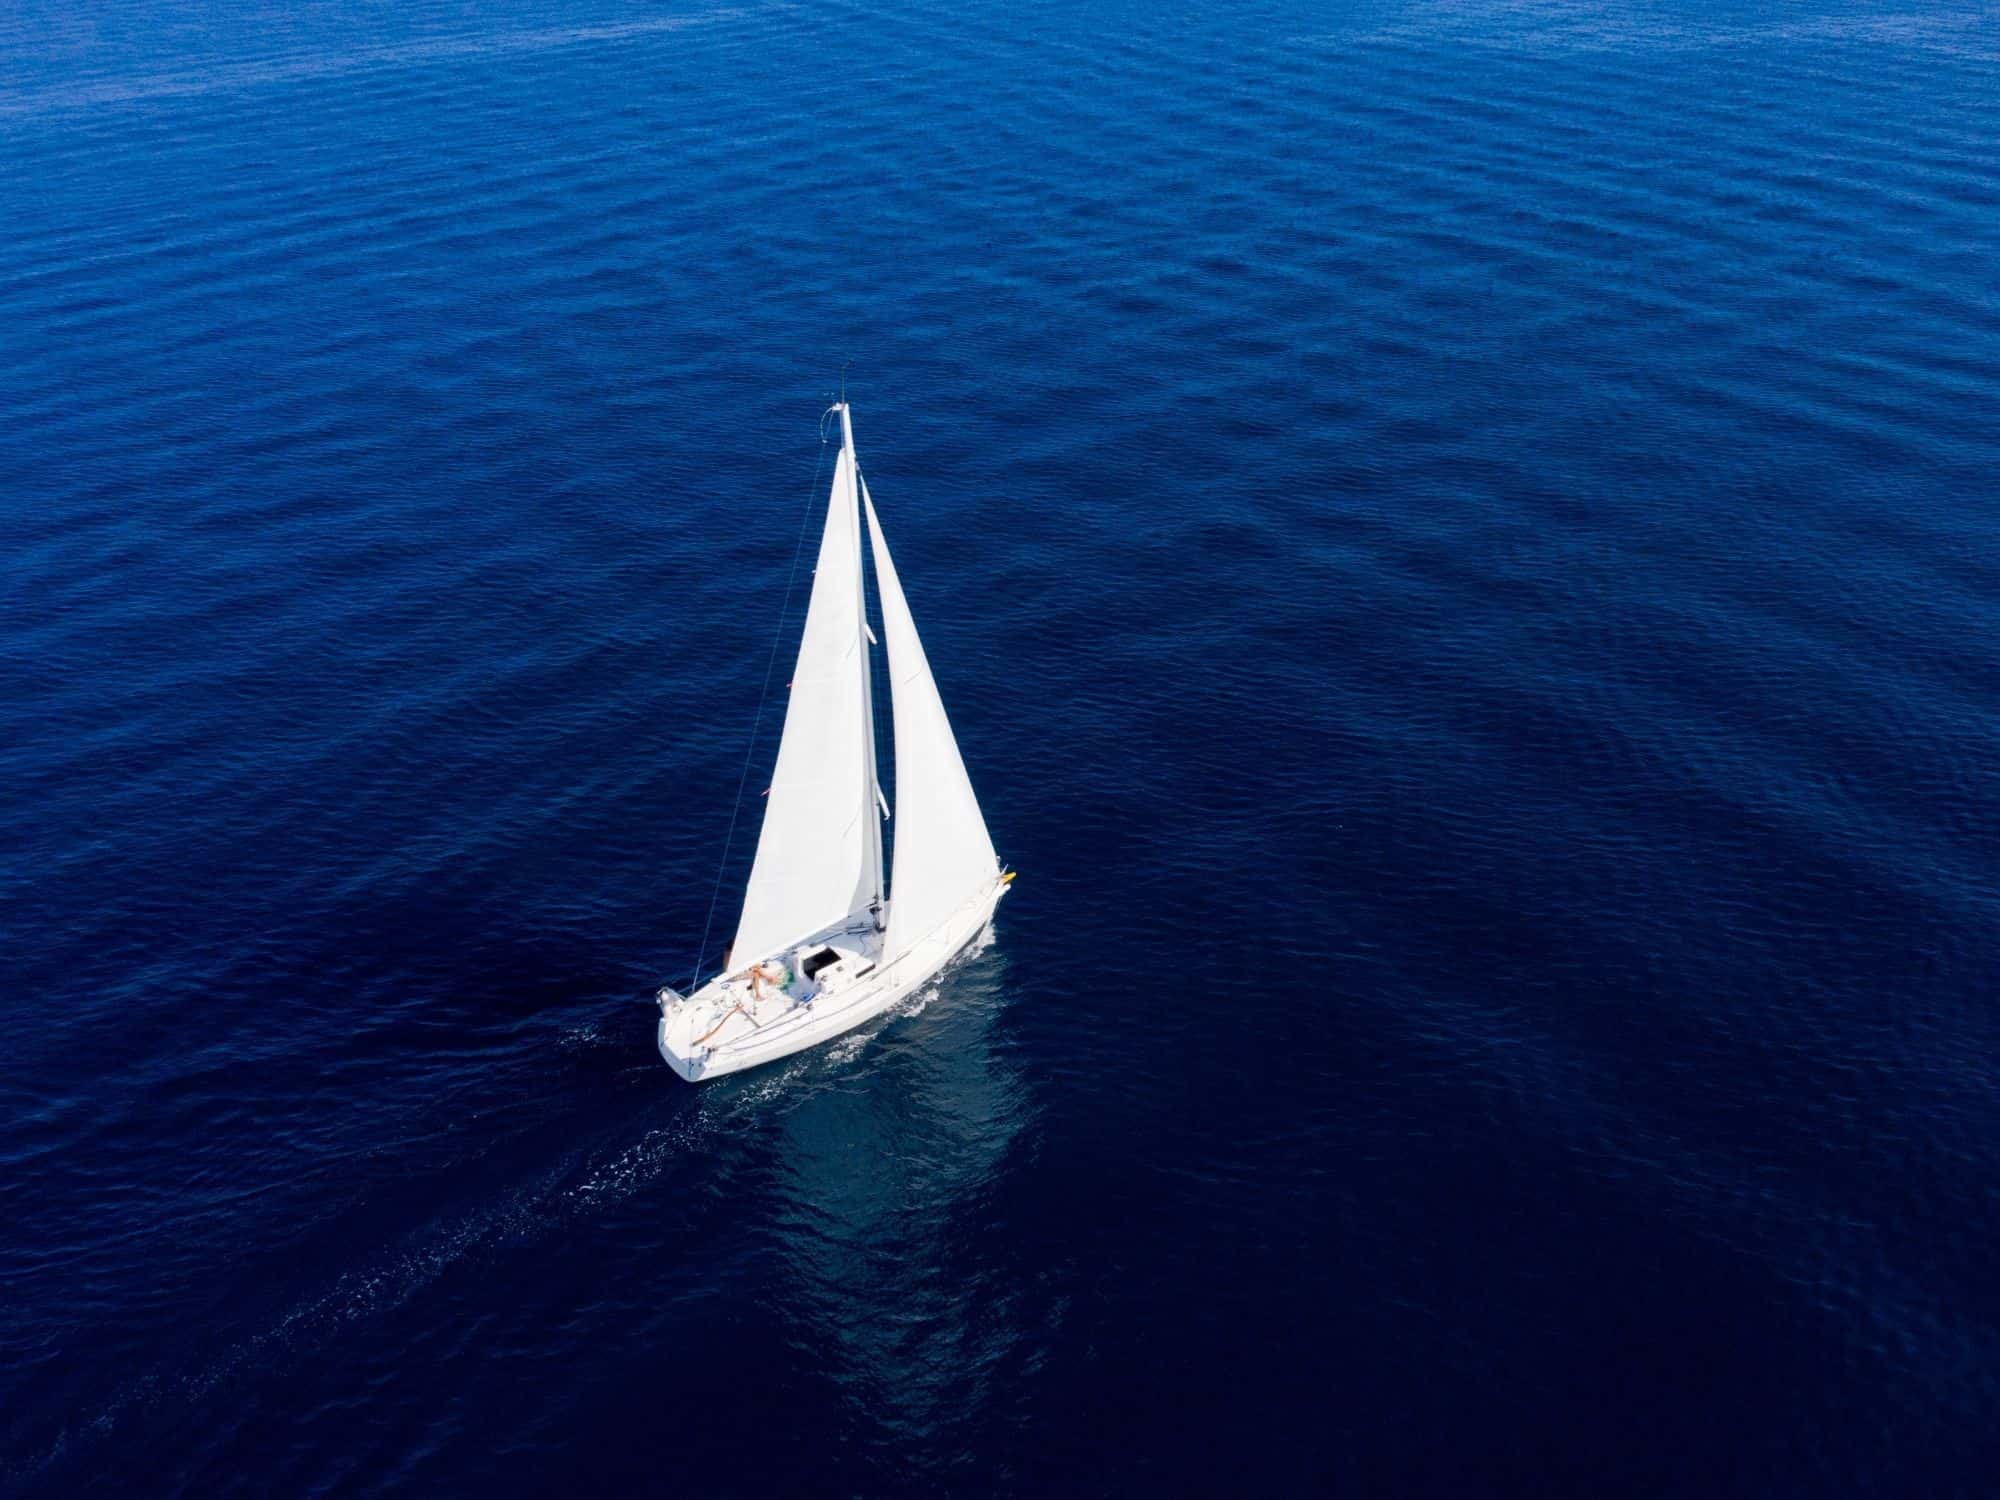 Best sailing Europe destinations - boat in the water